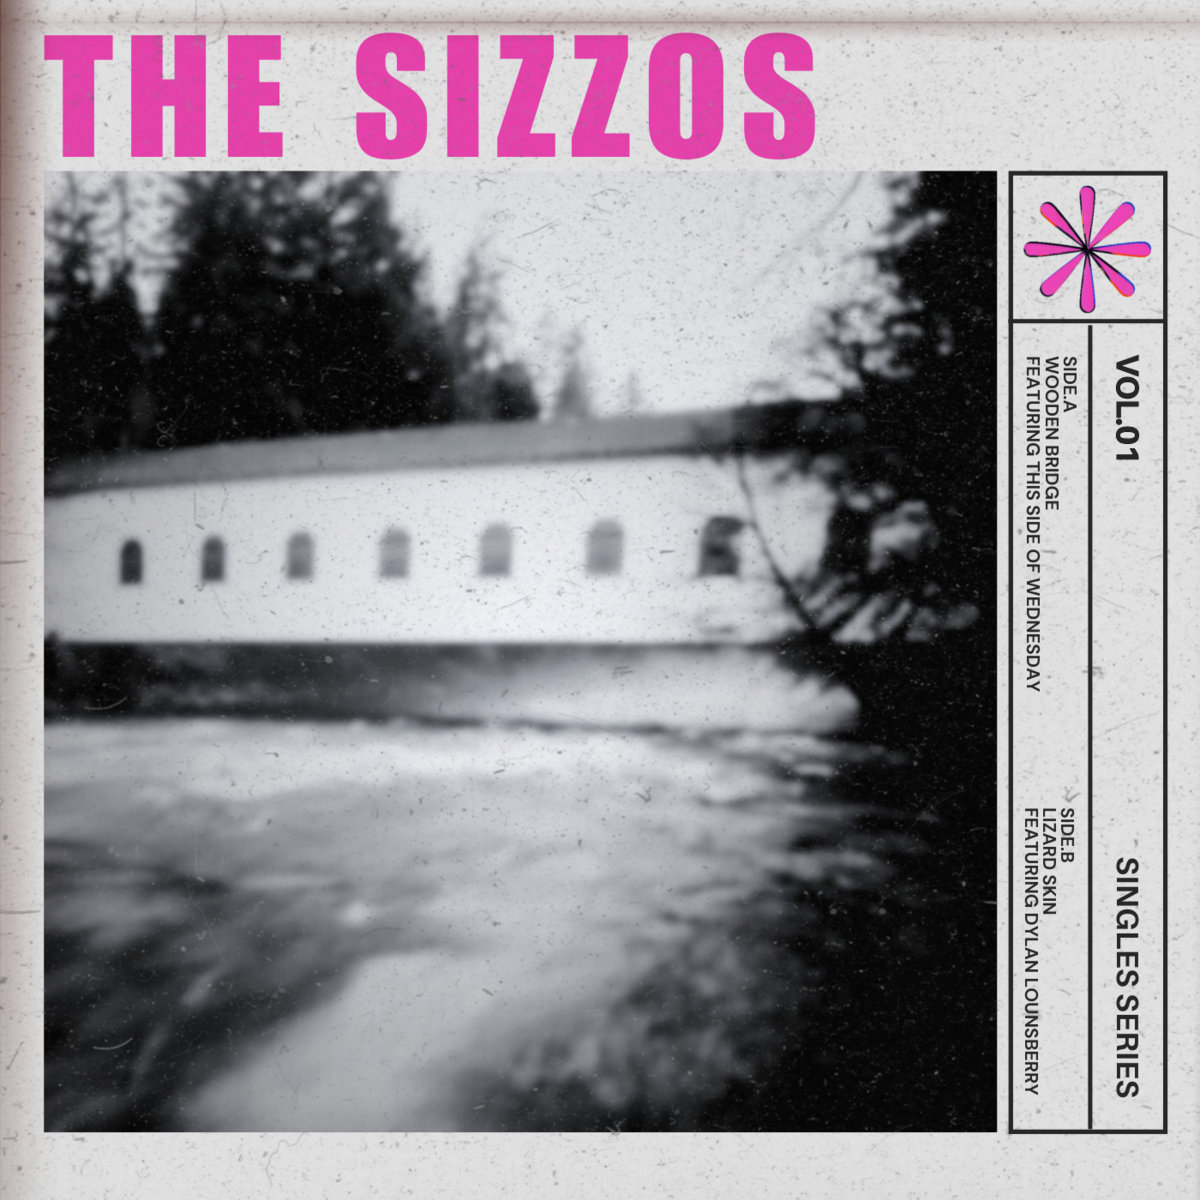 LISTEN: Singles Series Vol 1 by The Sizzos